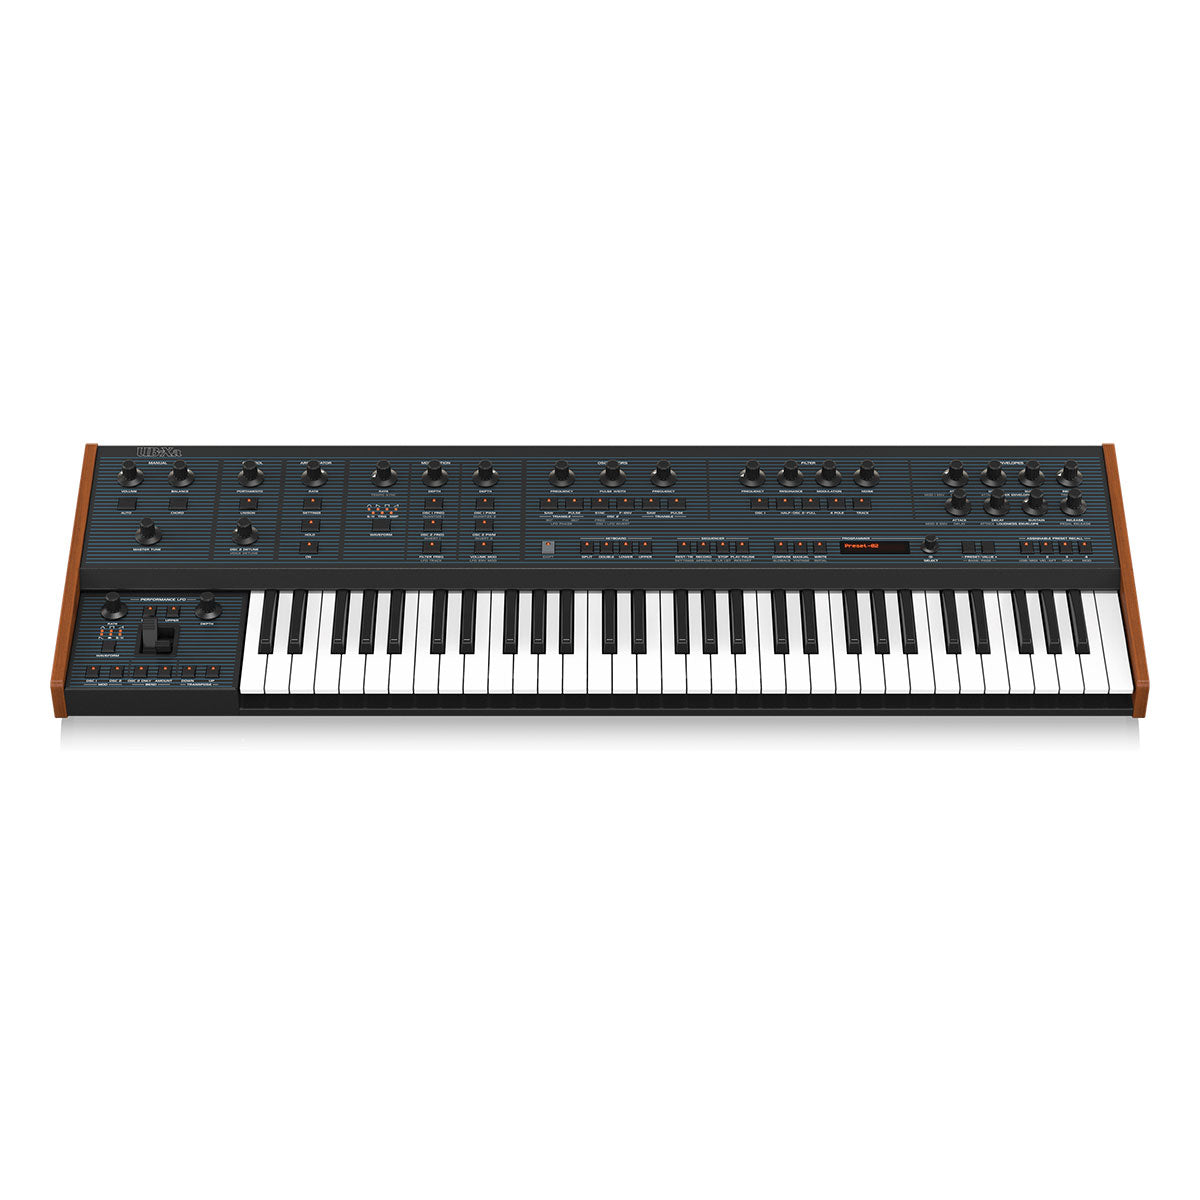 Behringer UB-Xa Classic Analog 16-Voice Multi-Timbral Polyphonic Synthesizer